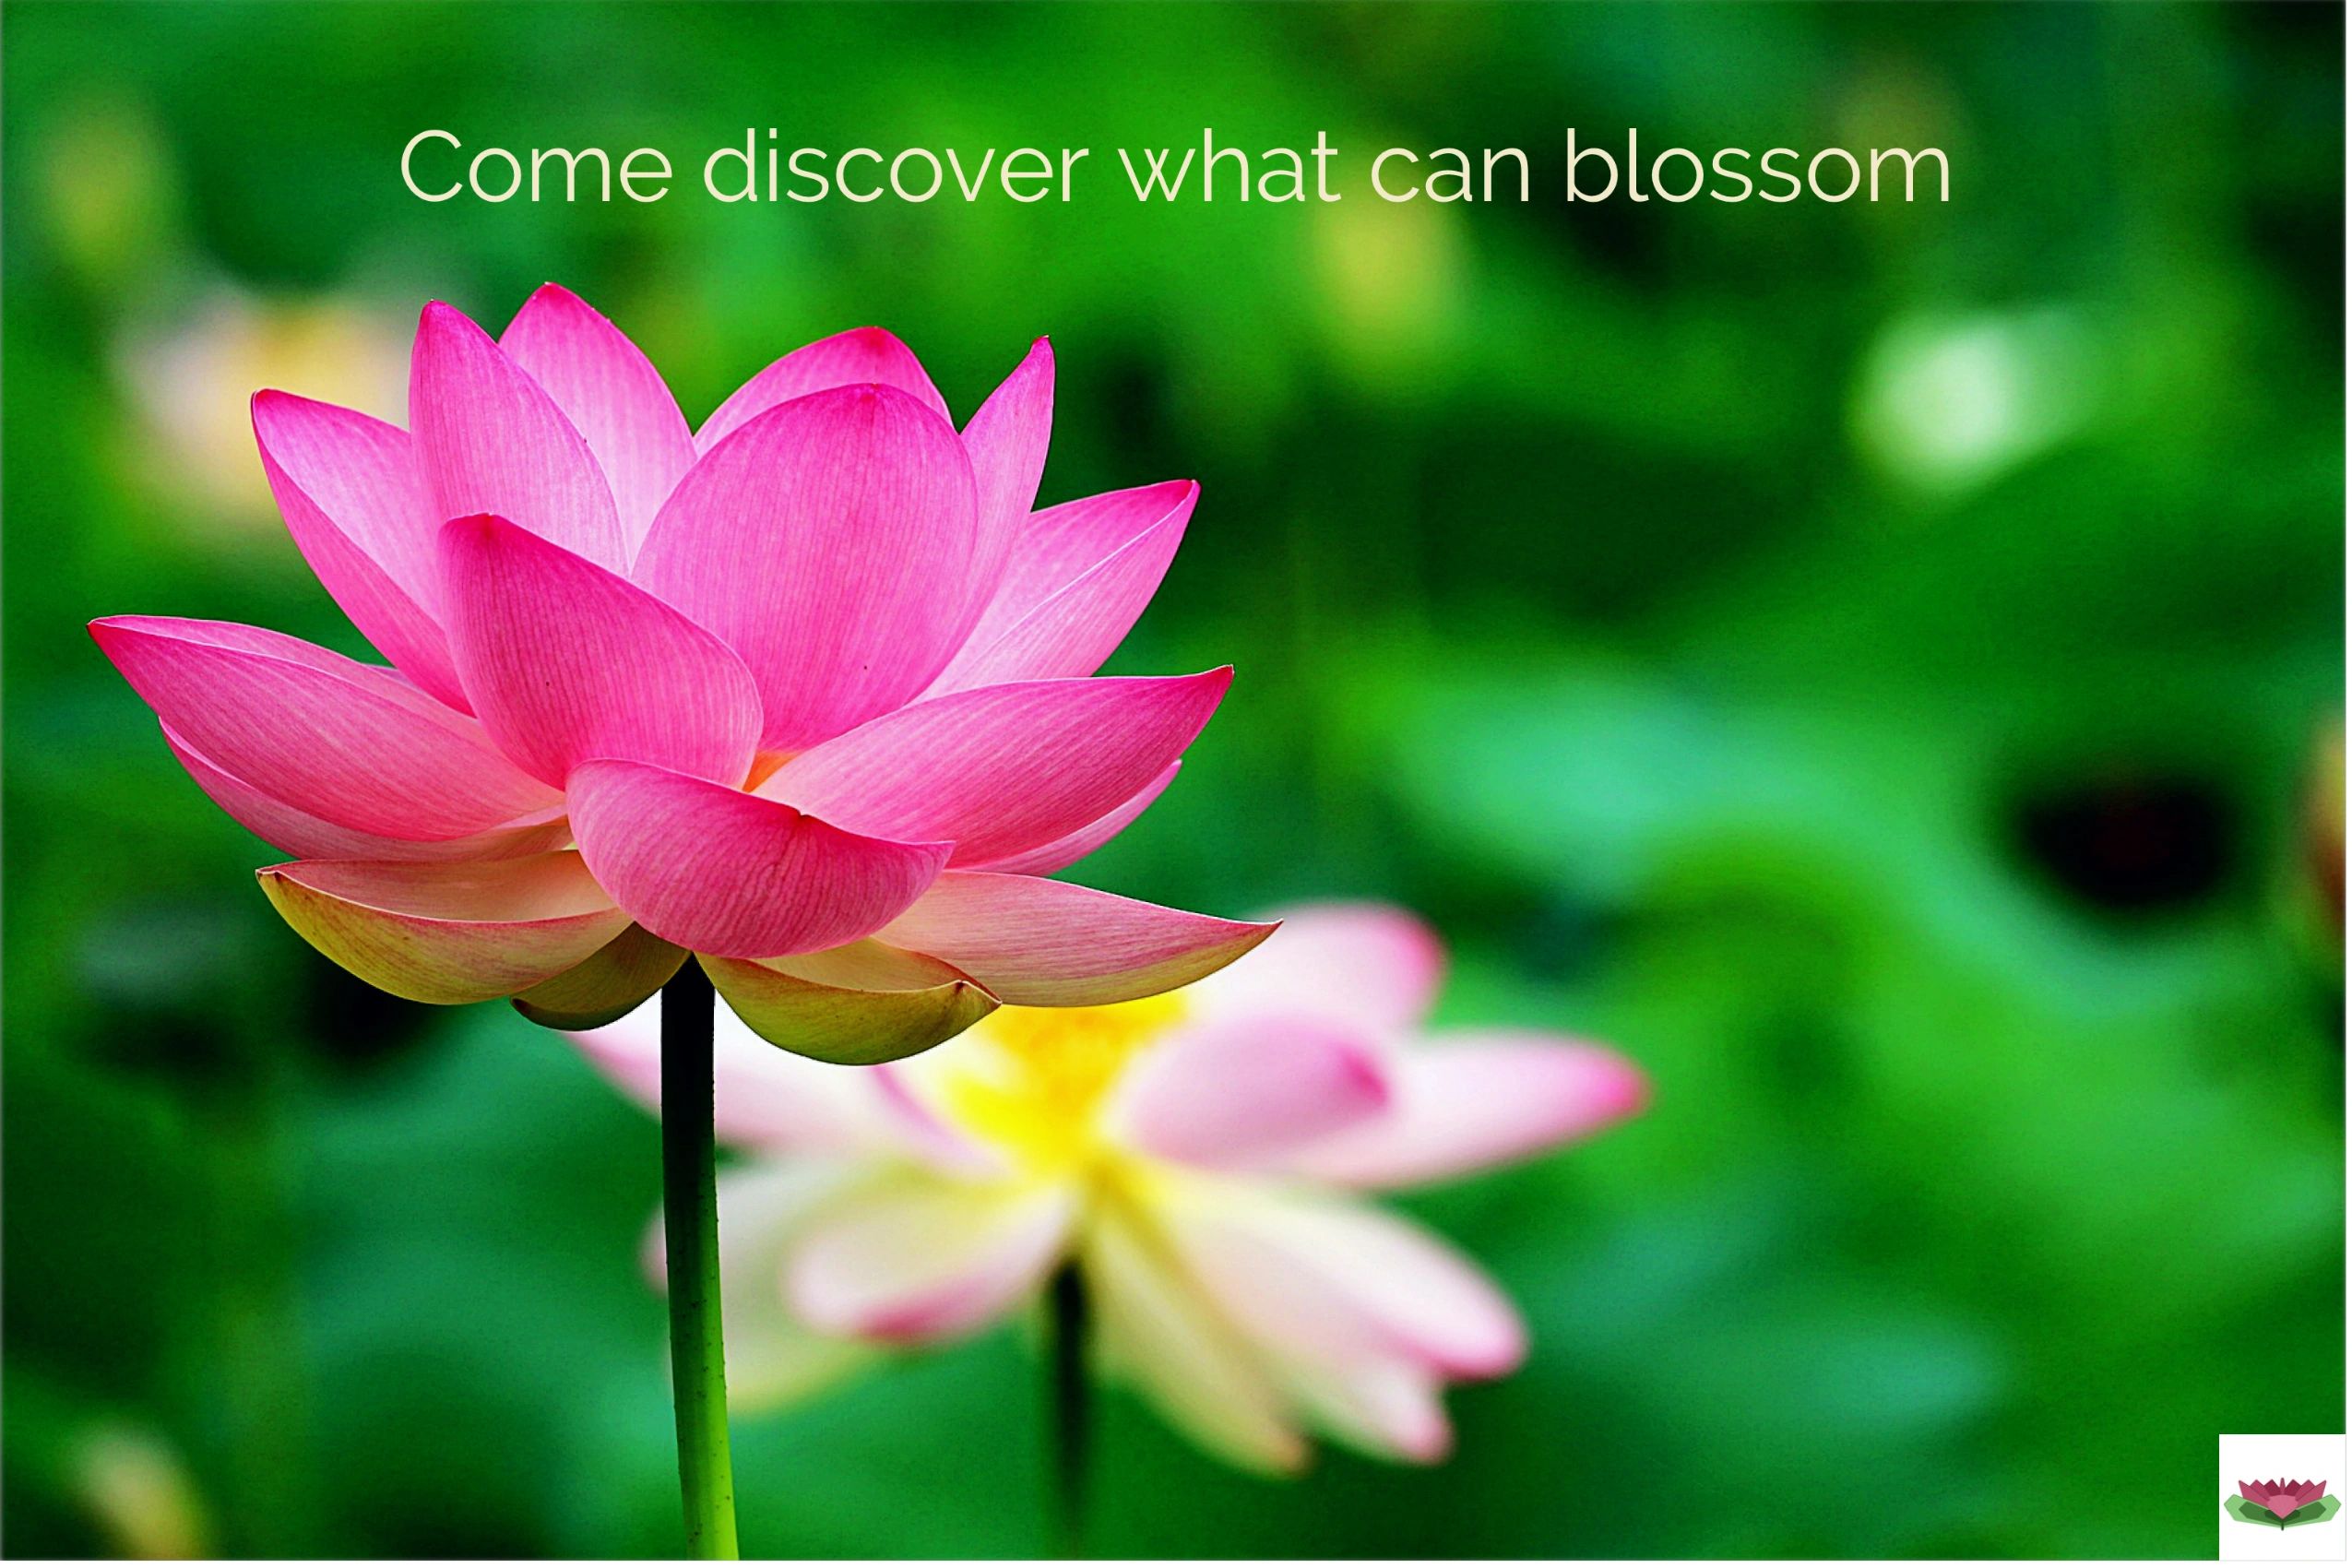 Bright pink blossom on a green background. Caption reads, "Come discover what can blossom"